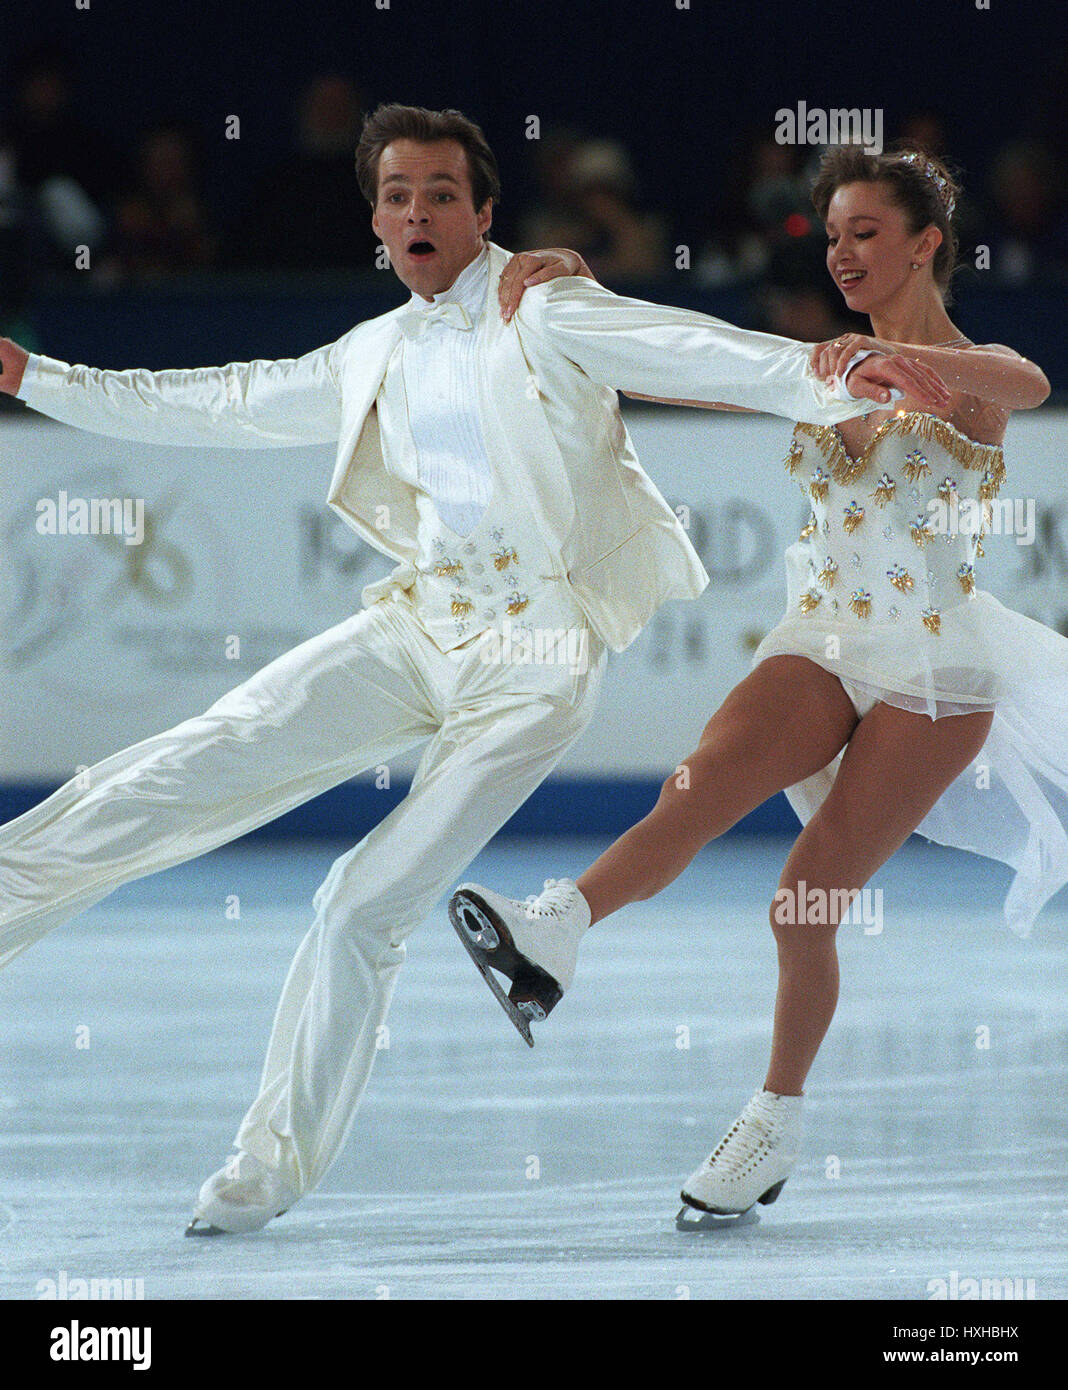 GRISCHUK & PLATOV ICE DANCE SKATERS 28 March 1995 Stock Photo